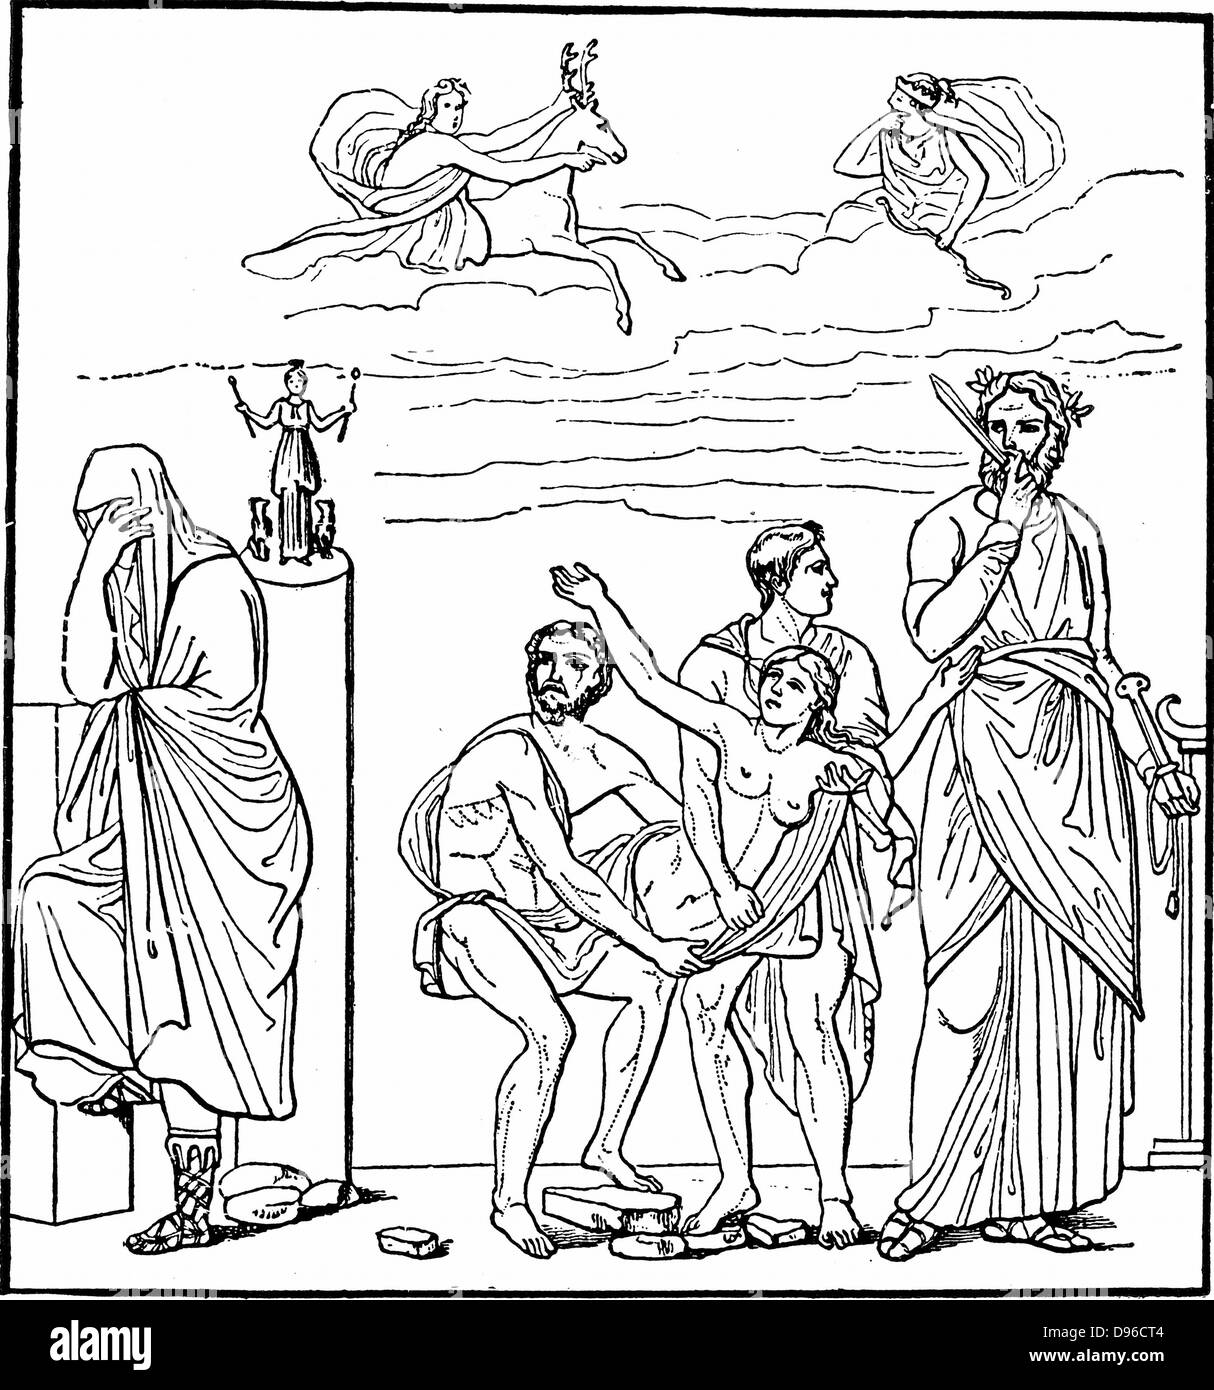 Iphigenia, daughter of Agamemnon, king of Mycenae. Sacrifice of Iphigenia by her father at Aulis to secure favourable winds for the fleet to sail against Troy. Rescued, according to legend, by Artemis (Diana) and carried to Tauris where she became a a priestess. Euripedes uses her story as plot material for two dramas. Stock Photo